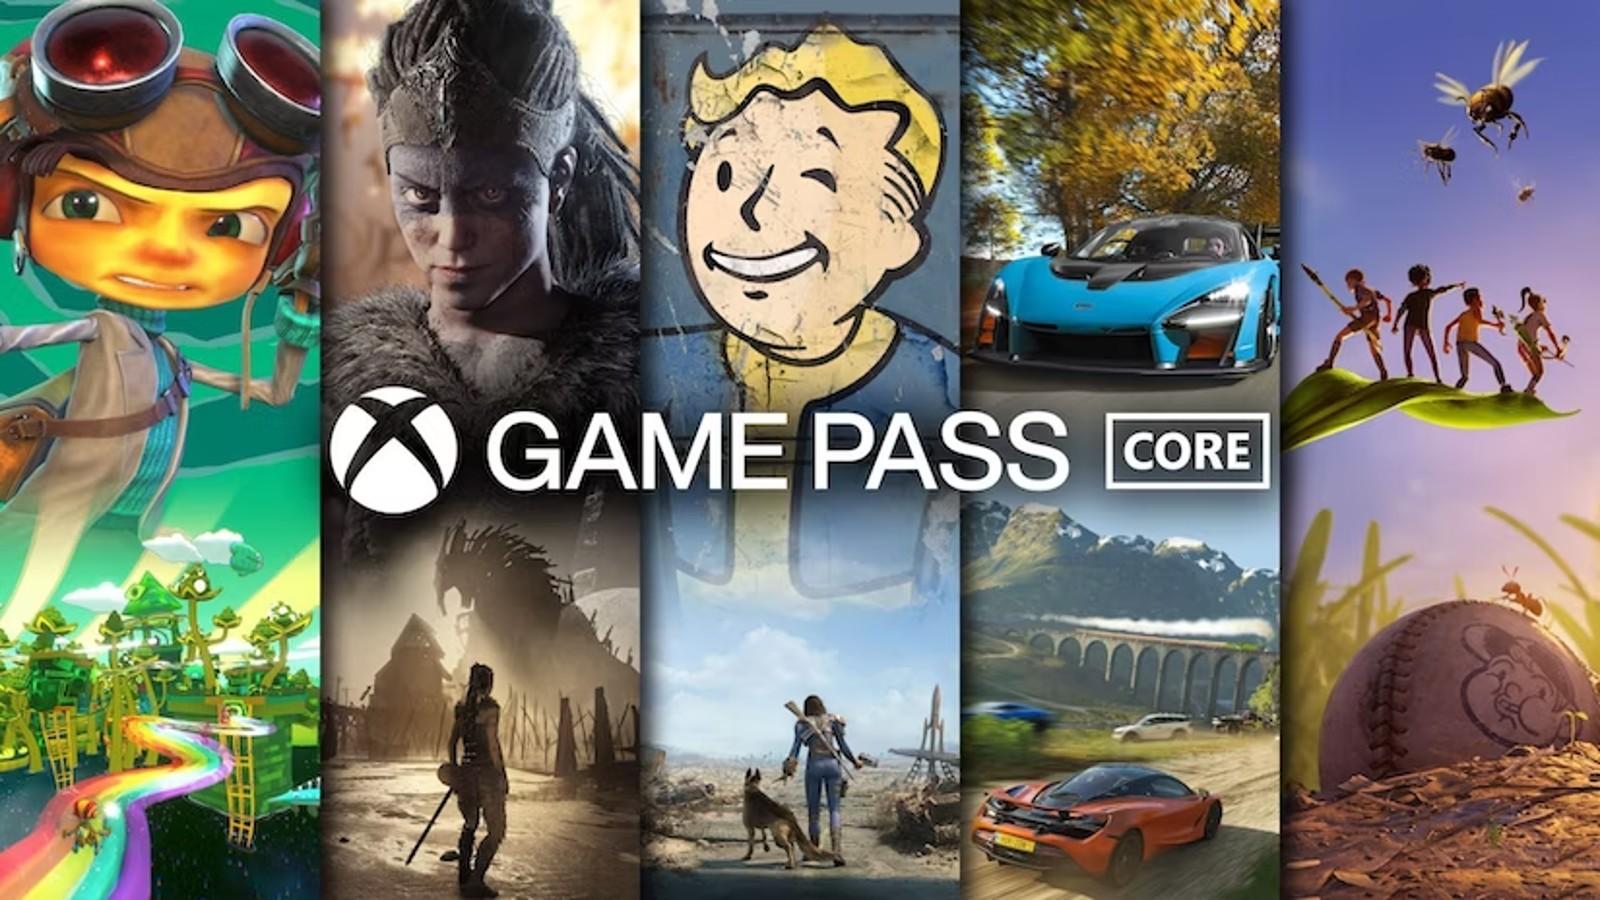 An image of Xbox Game Pass Core promotional art.